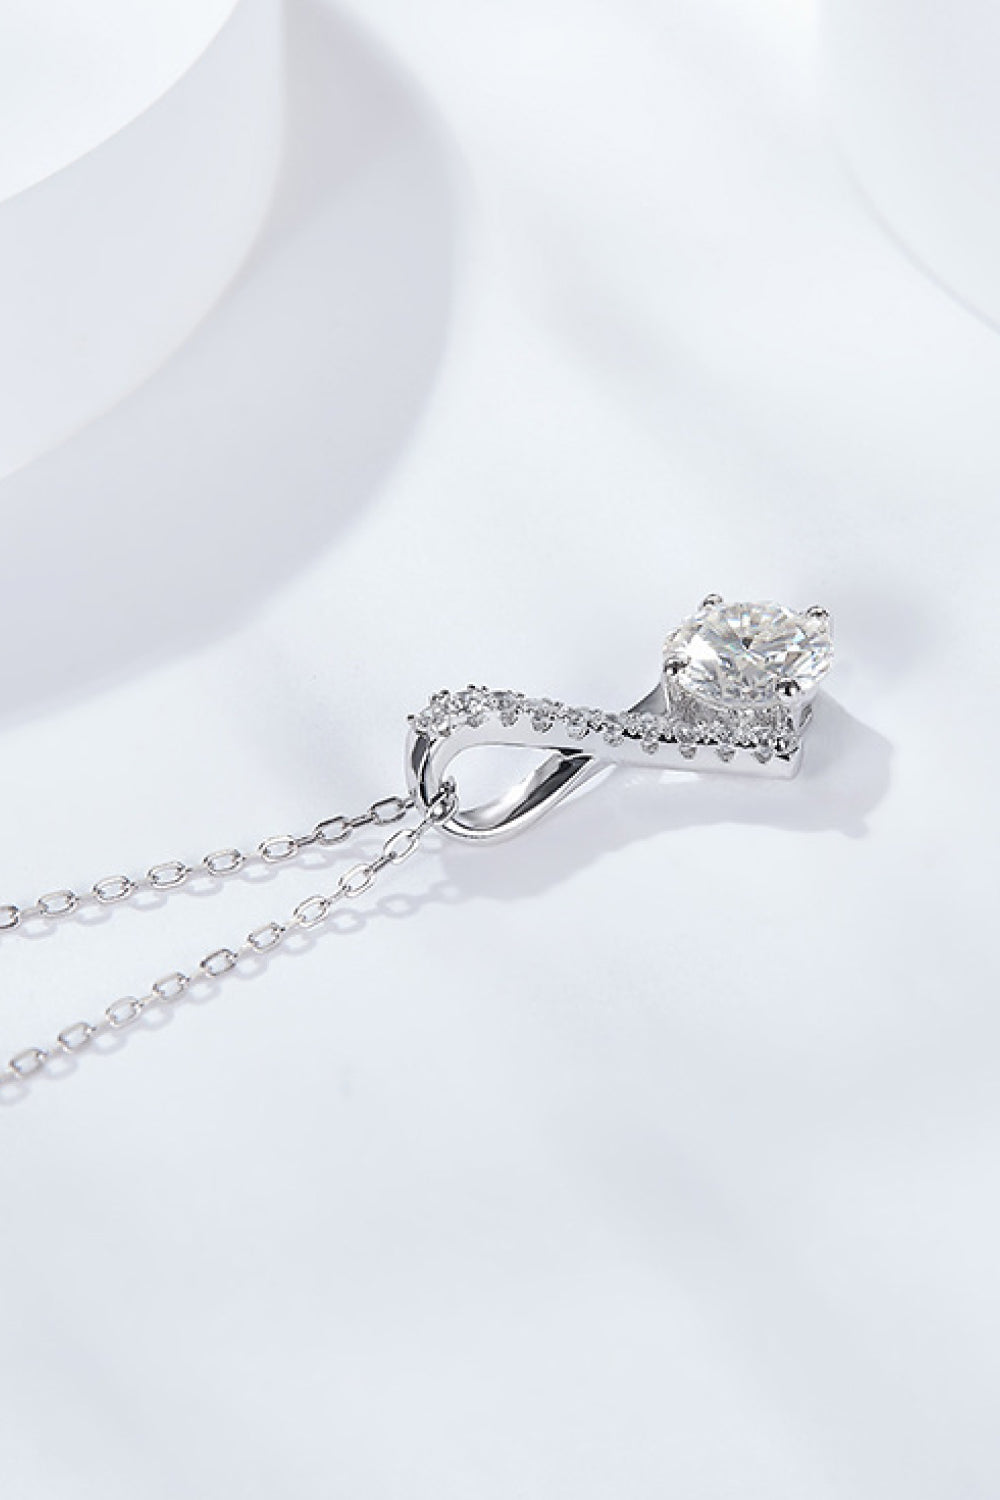 Special Occasion 1 Carat Moissanite Pendant Necklace